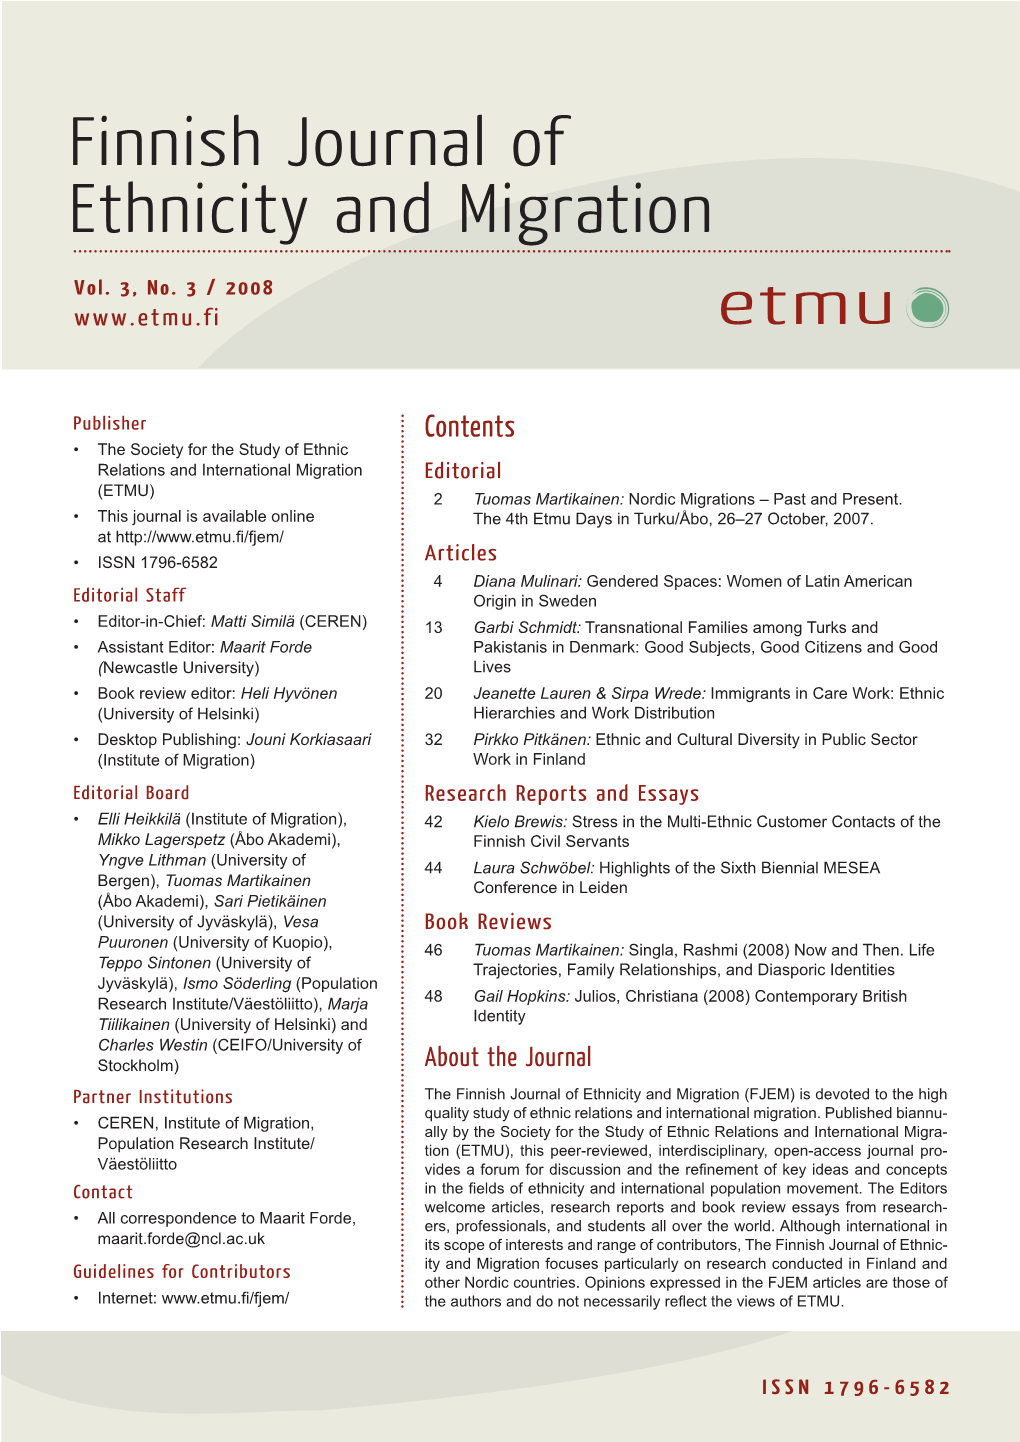 Finnish Journal of Ethnicity and Migration